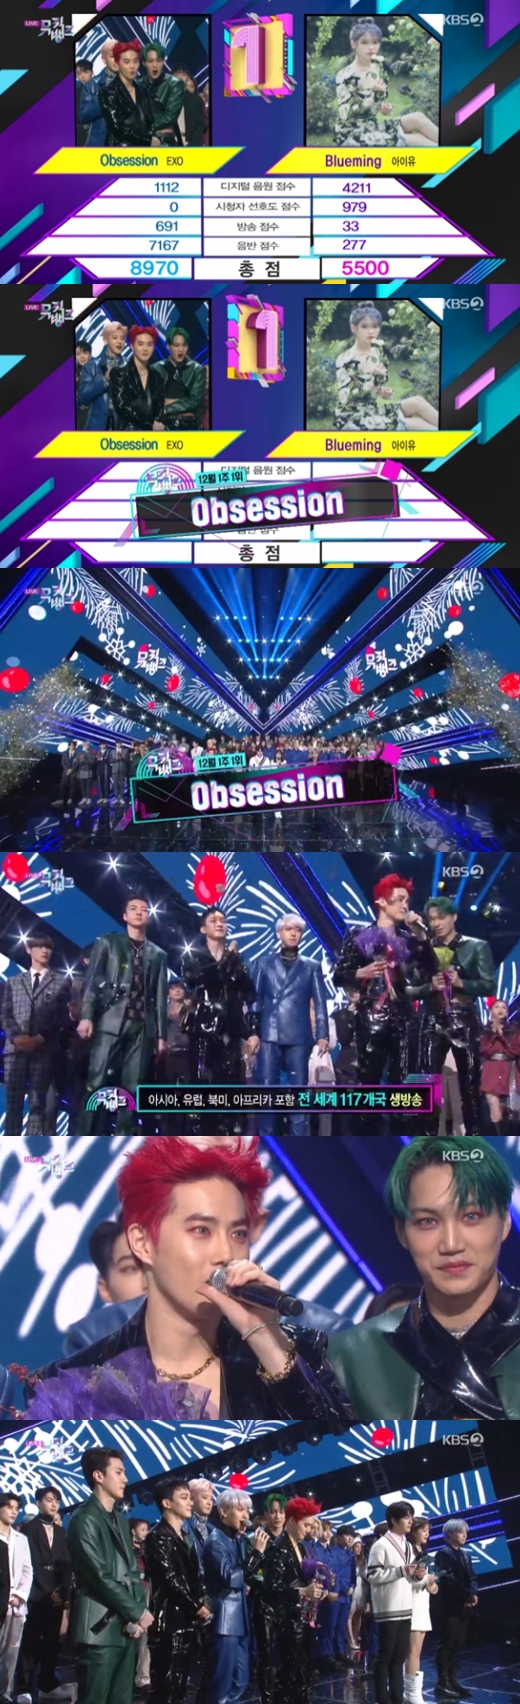 Group EXO won the first trophy at the same time as comeback.On KBS 2TV Music Bank broadcasted on the 6th, EXO Obsession and IU Bluemung were nominated for the first place.EXO, who was named first on the day, said, I am honored to EXOel all the time. I am sorry to keep you waiting and thank you for loving me a lot.The EXO will be responsible for the end of this year, and we will be happy until the end of the year.EXOs new song Obsession is a hip-hop dance song that can meet EXOs dark charisma with the title song of OBSESSION, which was released on the 27th of last month.It features addictiveness of vocal samples repeated like magic, heavy beats, and straight monologue lyrics.On the other hand, Music Bank includes 1TEAM, AOA, Bandit, CIX, EXO, JxR, One-on-One of, Steady, Golden Child, Nature, New Kid, Limitless, Park Jun Ho, Park Ji Hoon, Se-See, Astro, Starring Lee Jun-young, the space girl, etc.